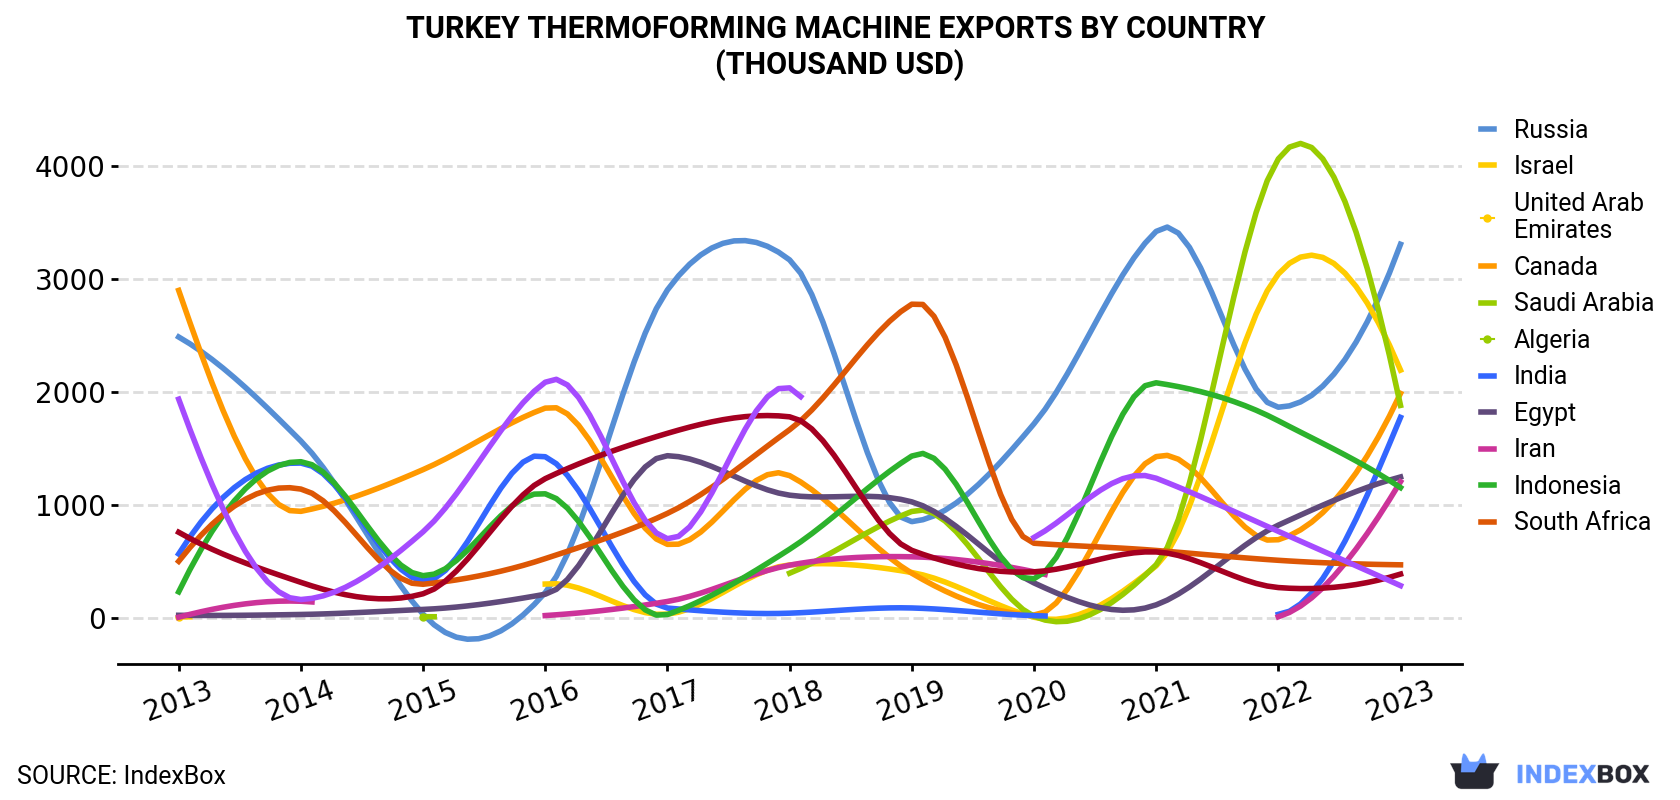 Turkey Thermoforming Machine Exports By Country (Thousand USD)